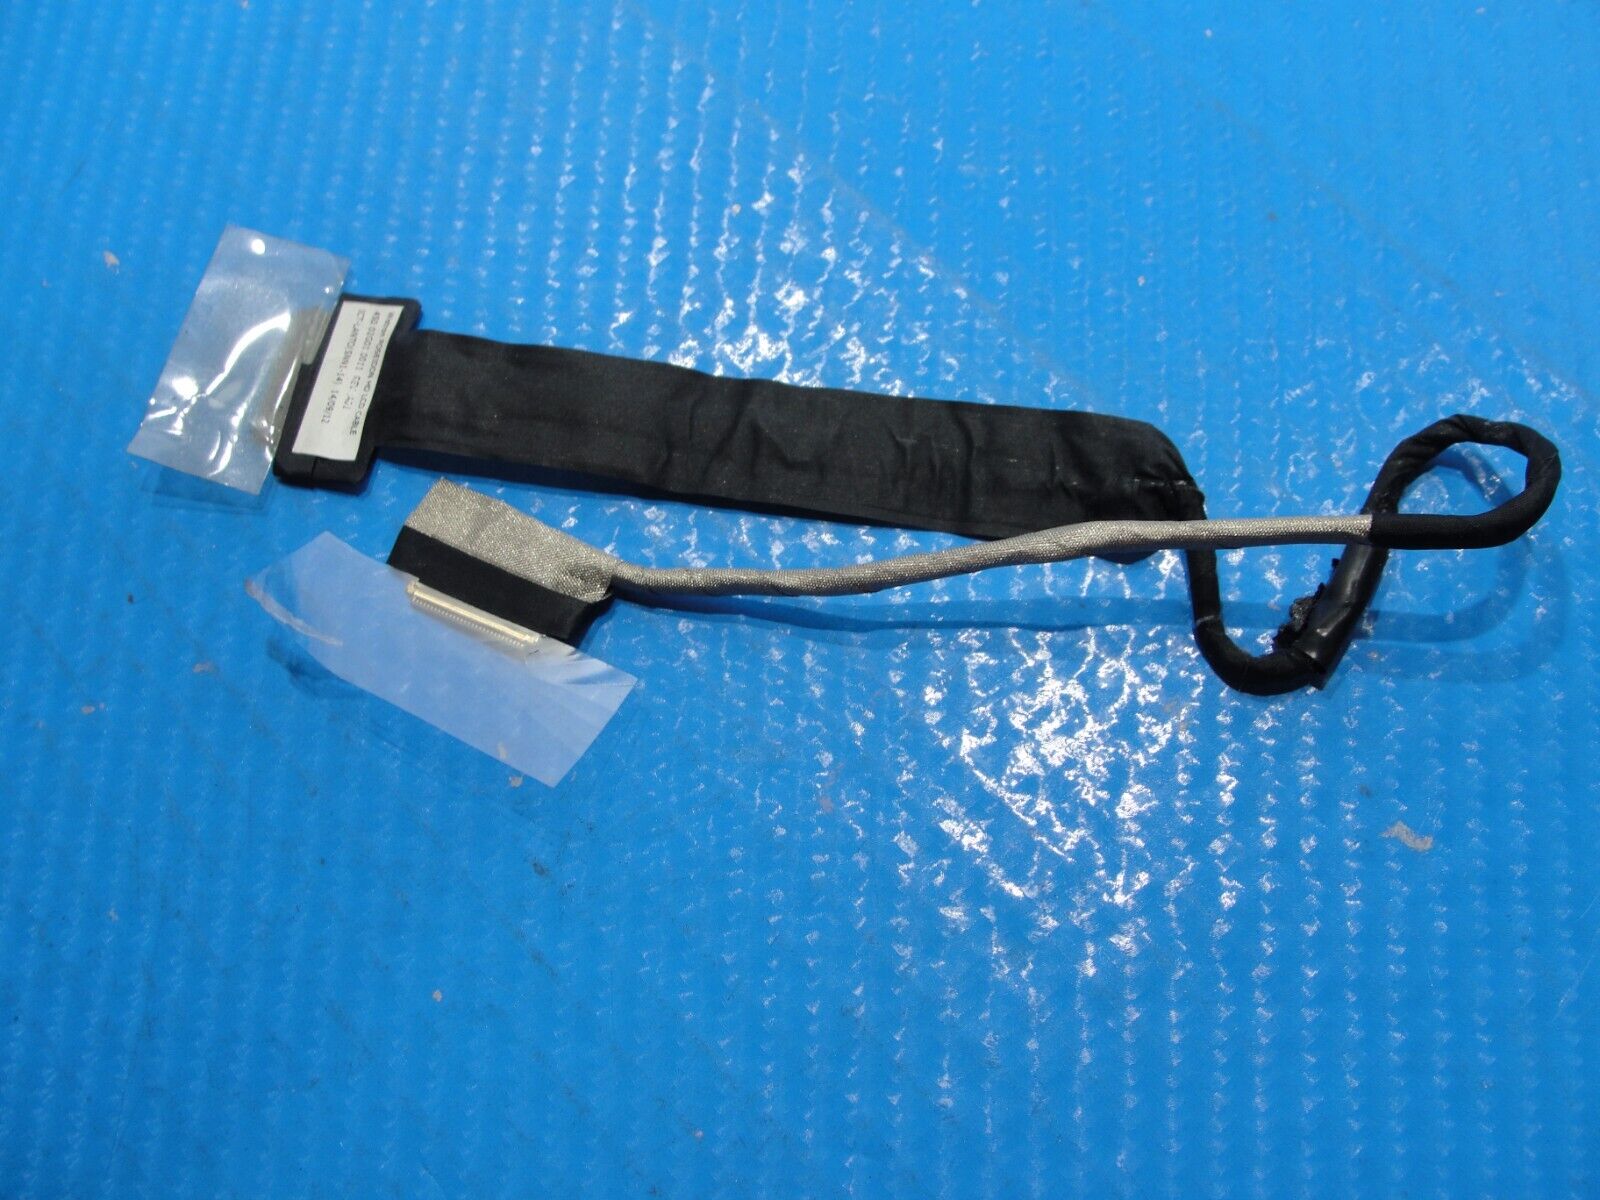 Acer Aspire Nitro 17.3 VN7-791 Genuine LCD Video Cable 450.02g01.0011 Tested Laptop Parts - Replacement Parts for Repairs